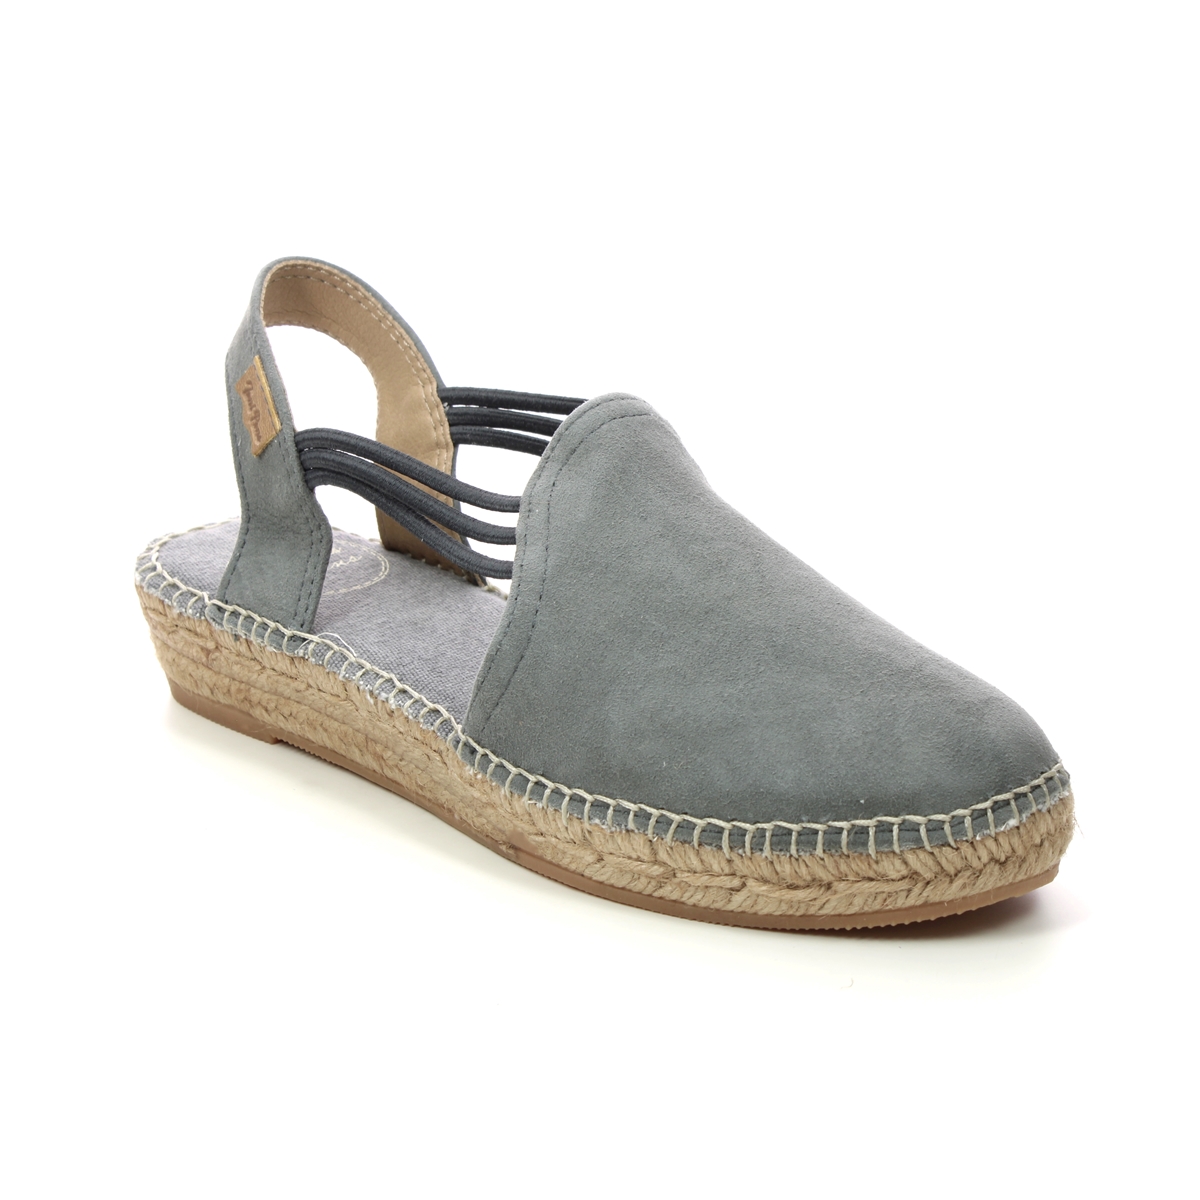 Toni Pons Nuria In Grey Suede 0110-03 In Size 42 In Plain Grey Suede